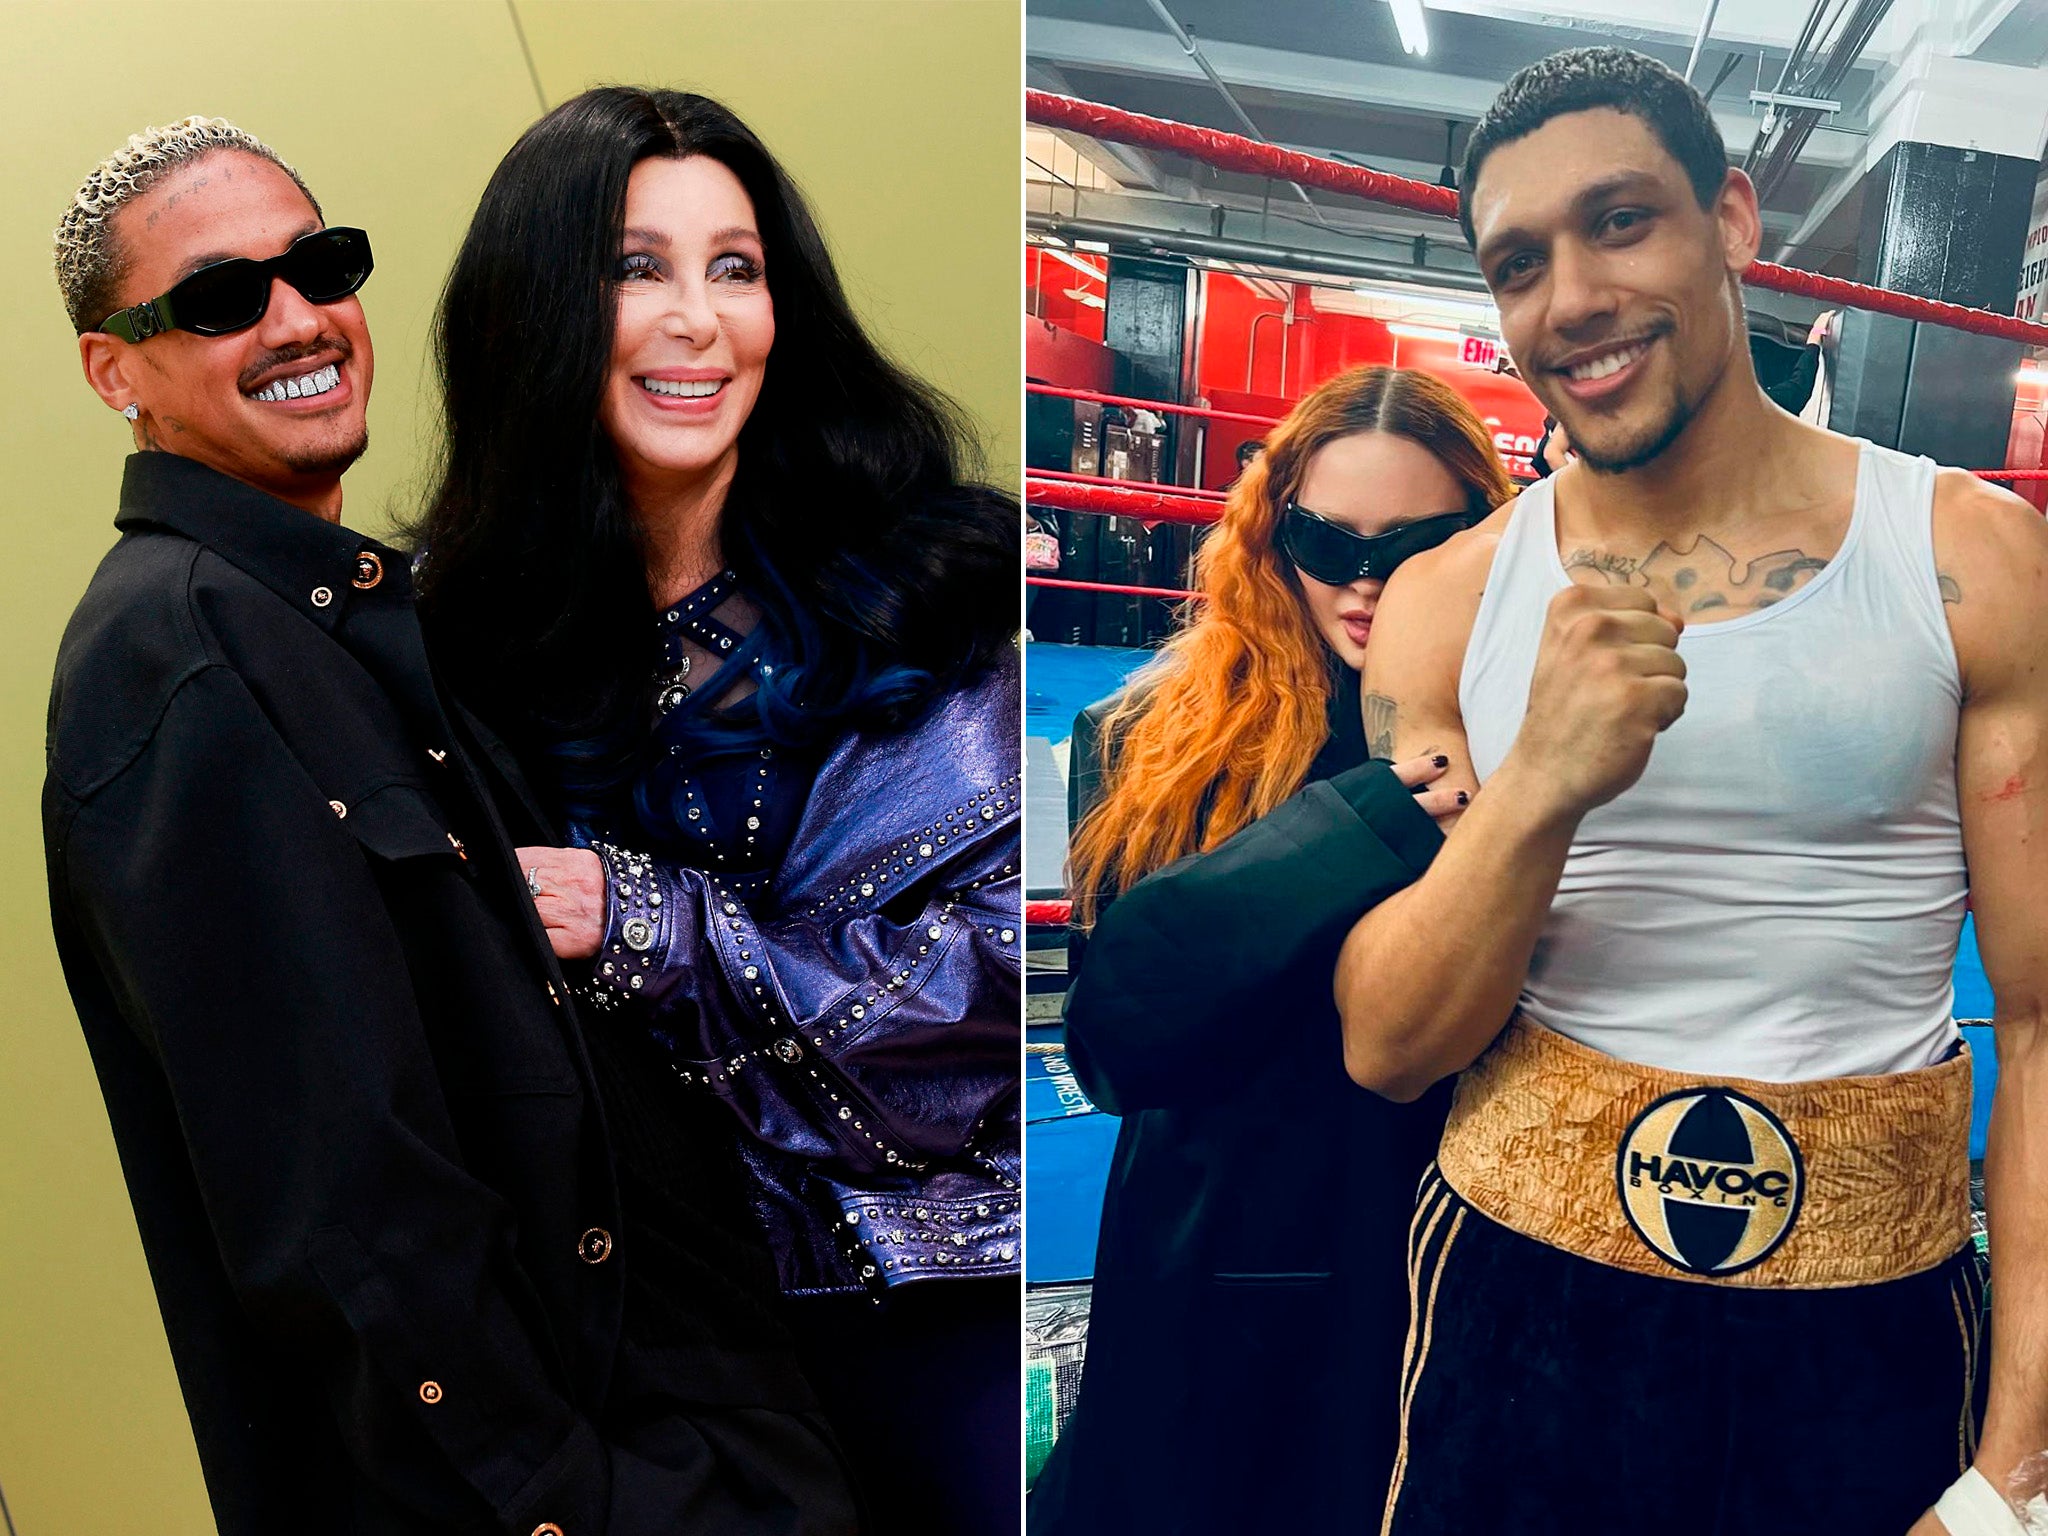 Madonna and Cher have boyfriends half their age? Good for them The